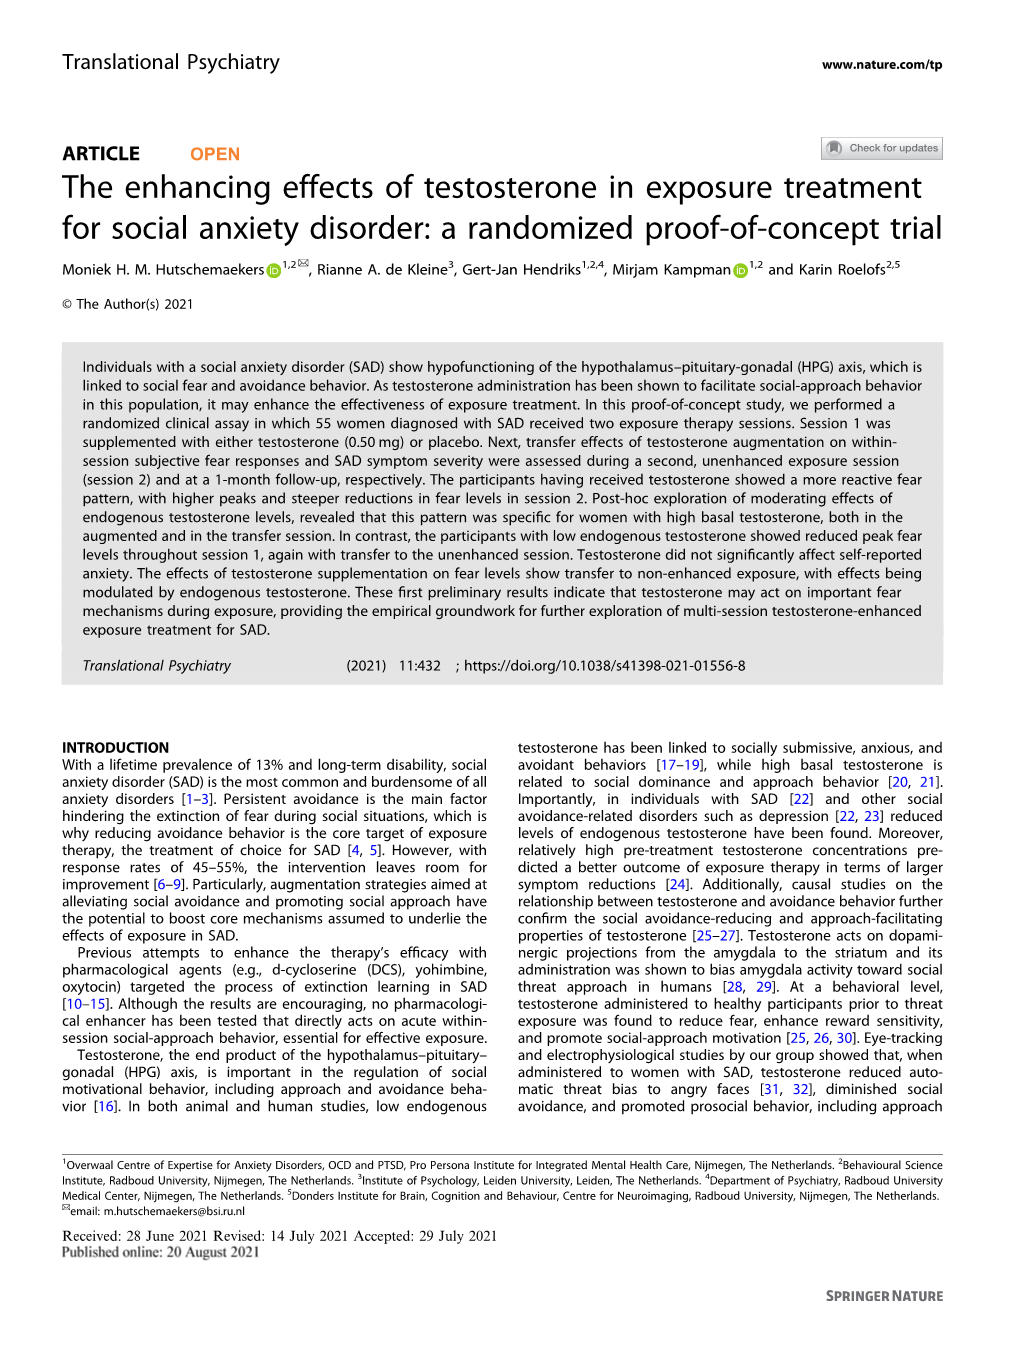 The Enhancing Effects of Testosterone in Exposure Treatment for Social Anxiety Disorder: a Randomized Proof-Of-Concept Trial ✉ Moniek H